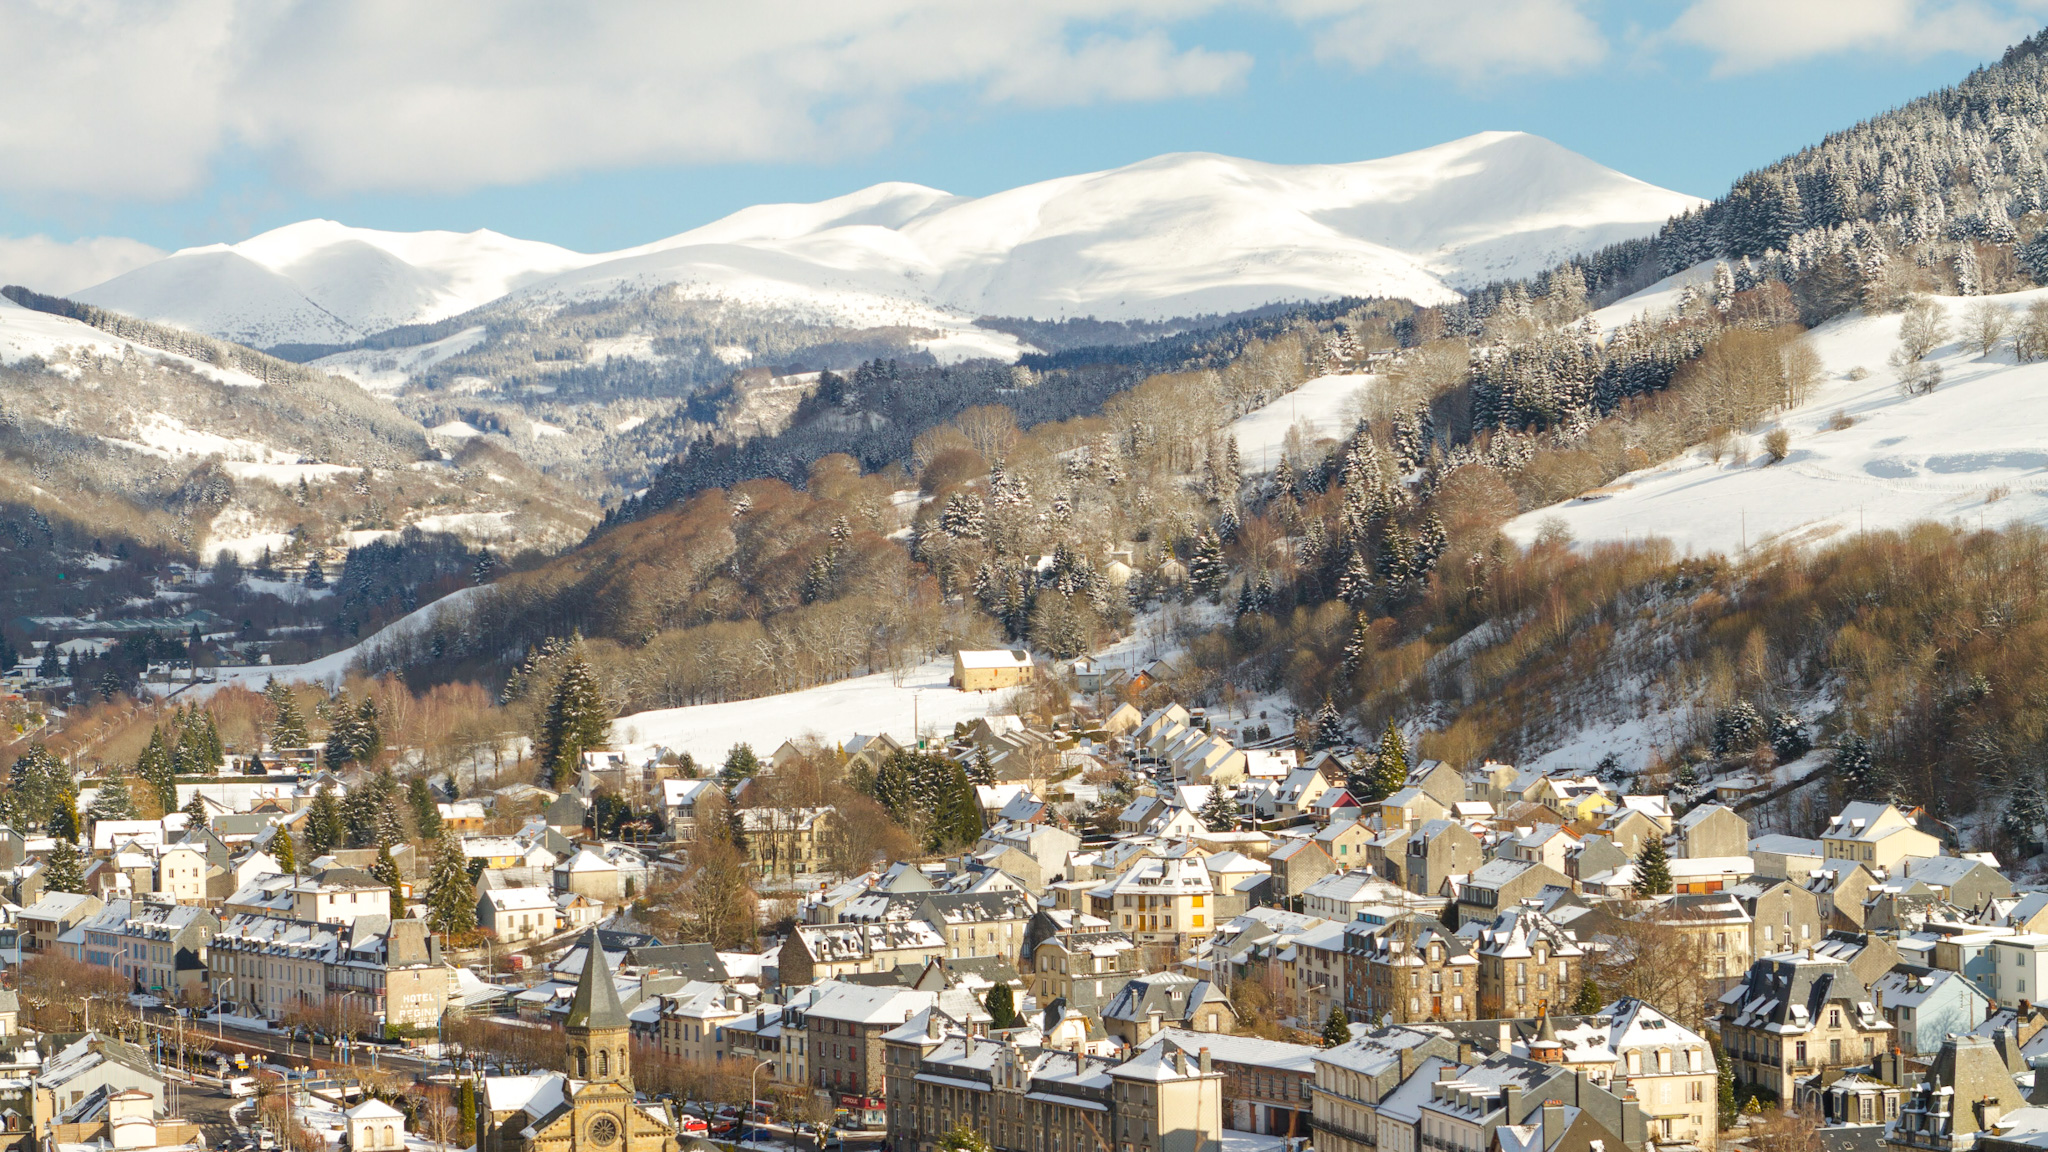 The snow-covered Bourboule and the snow-covered Massif du Sancy